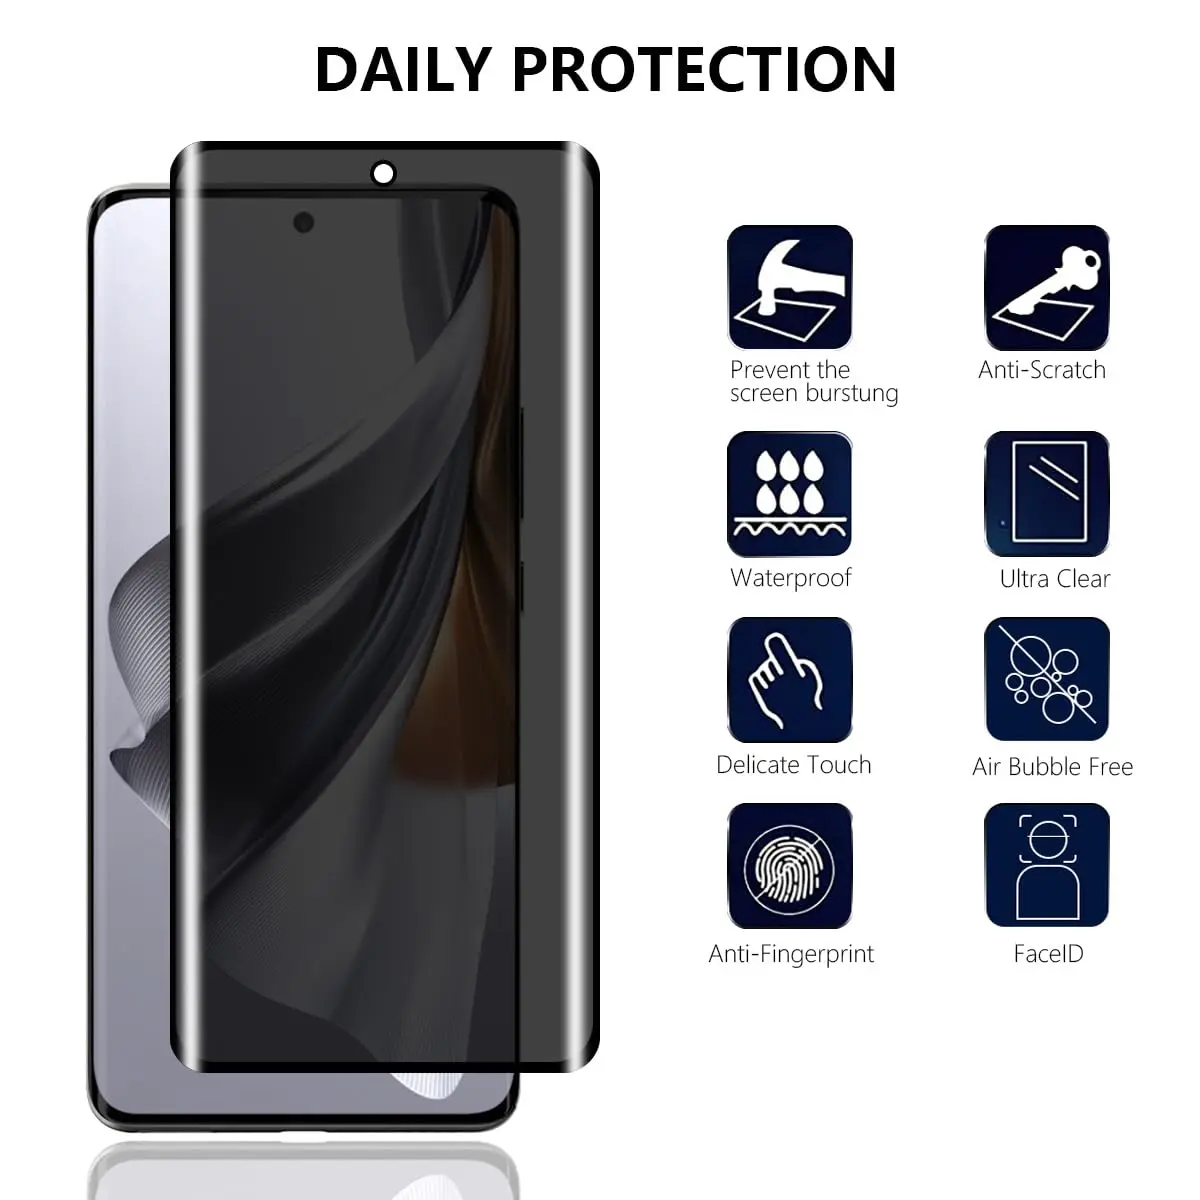 Anti Spy Screen Protector For OPPO Reno 10 Pro Plus, 3D Privacy Tempered Glass 9H Peep Case Friendly Free Shipping